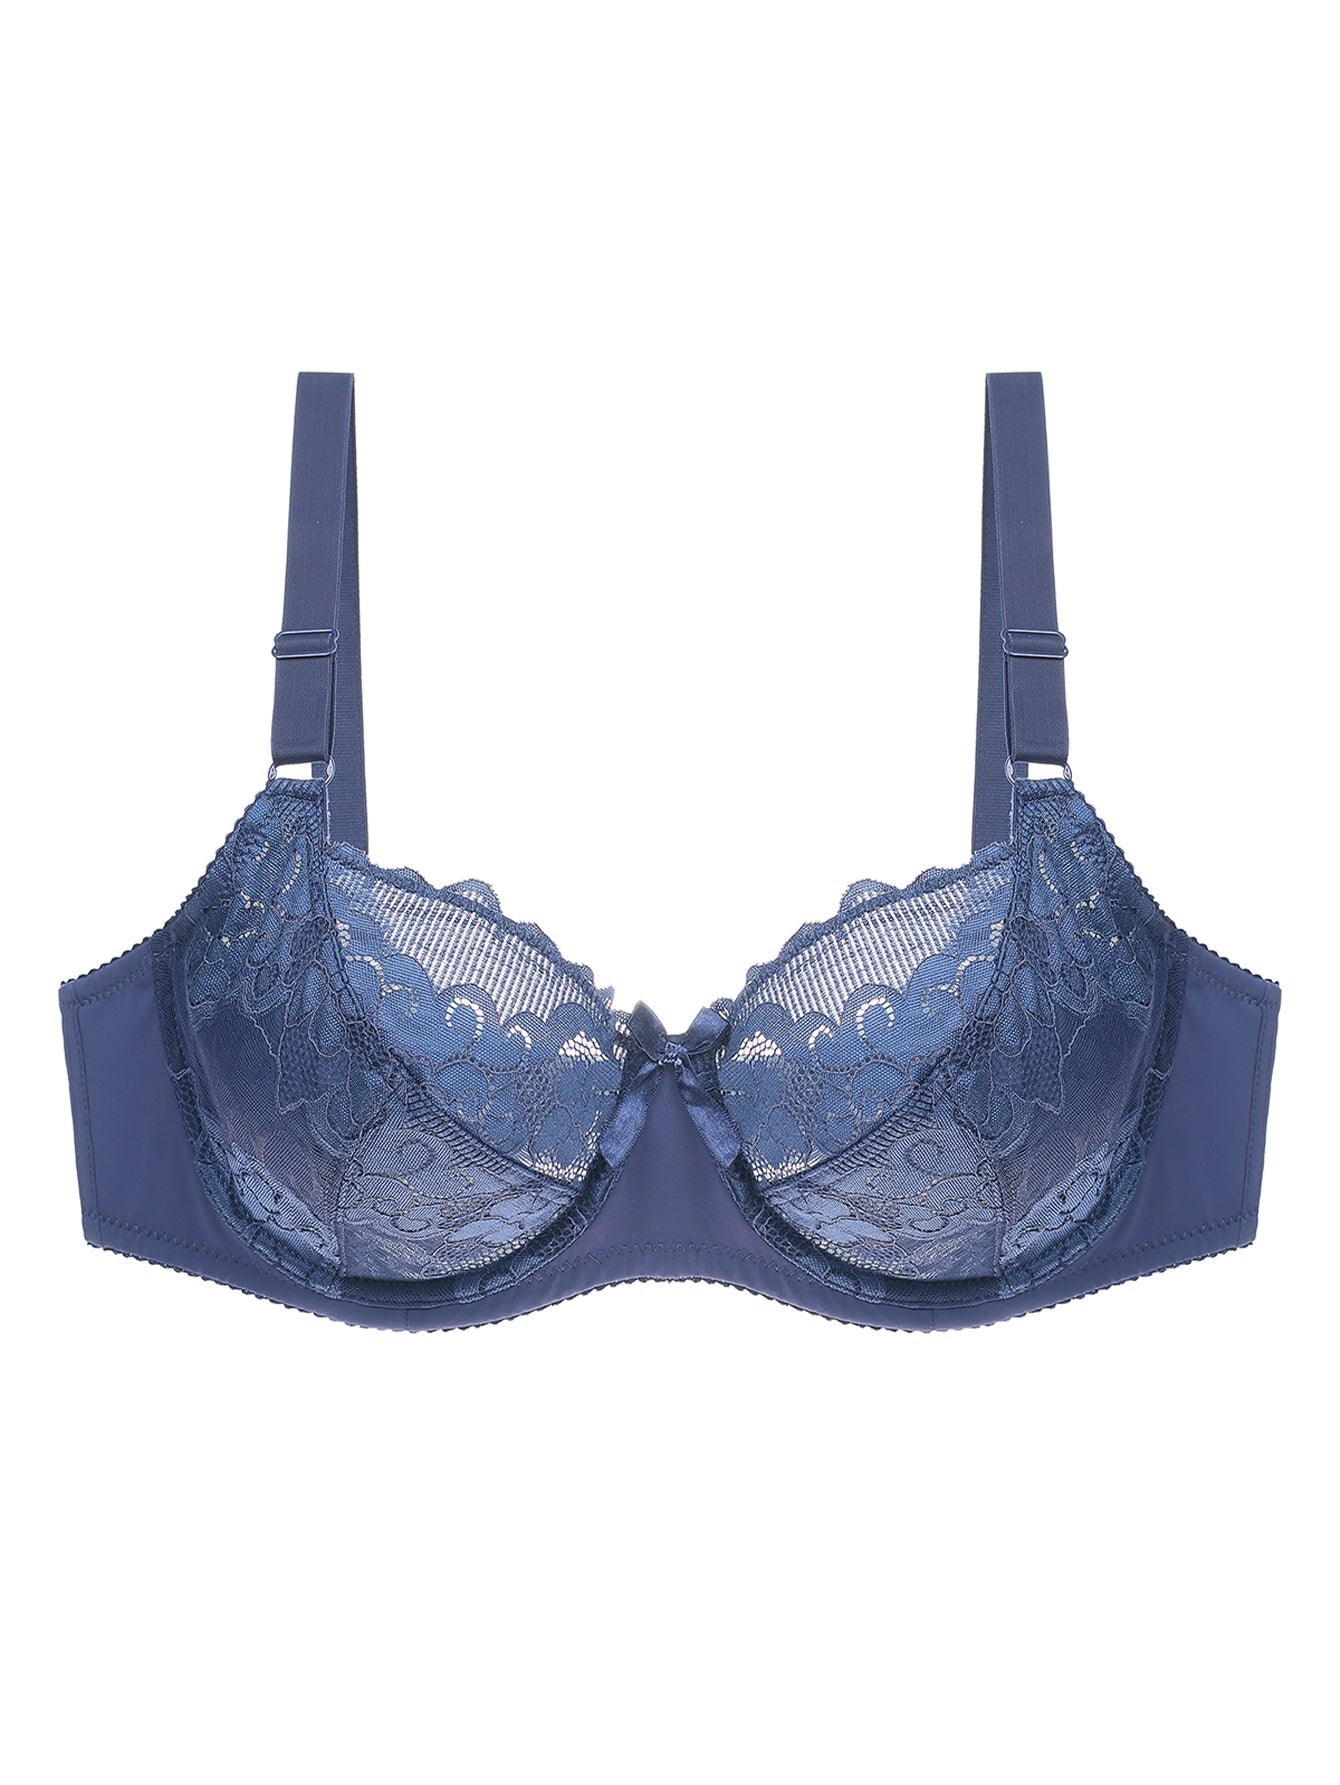 Full Cup Breathable Unlined Bra Lace Sexy Adjustable Straps Underwired Bra Plus Size Sai Feel